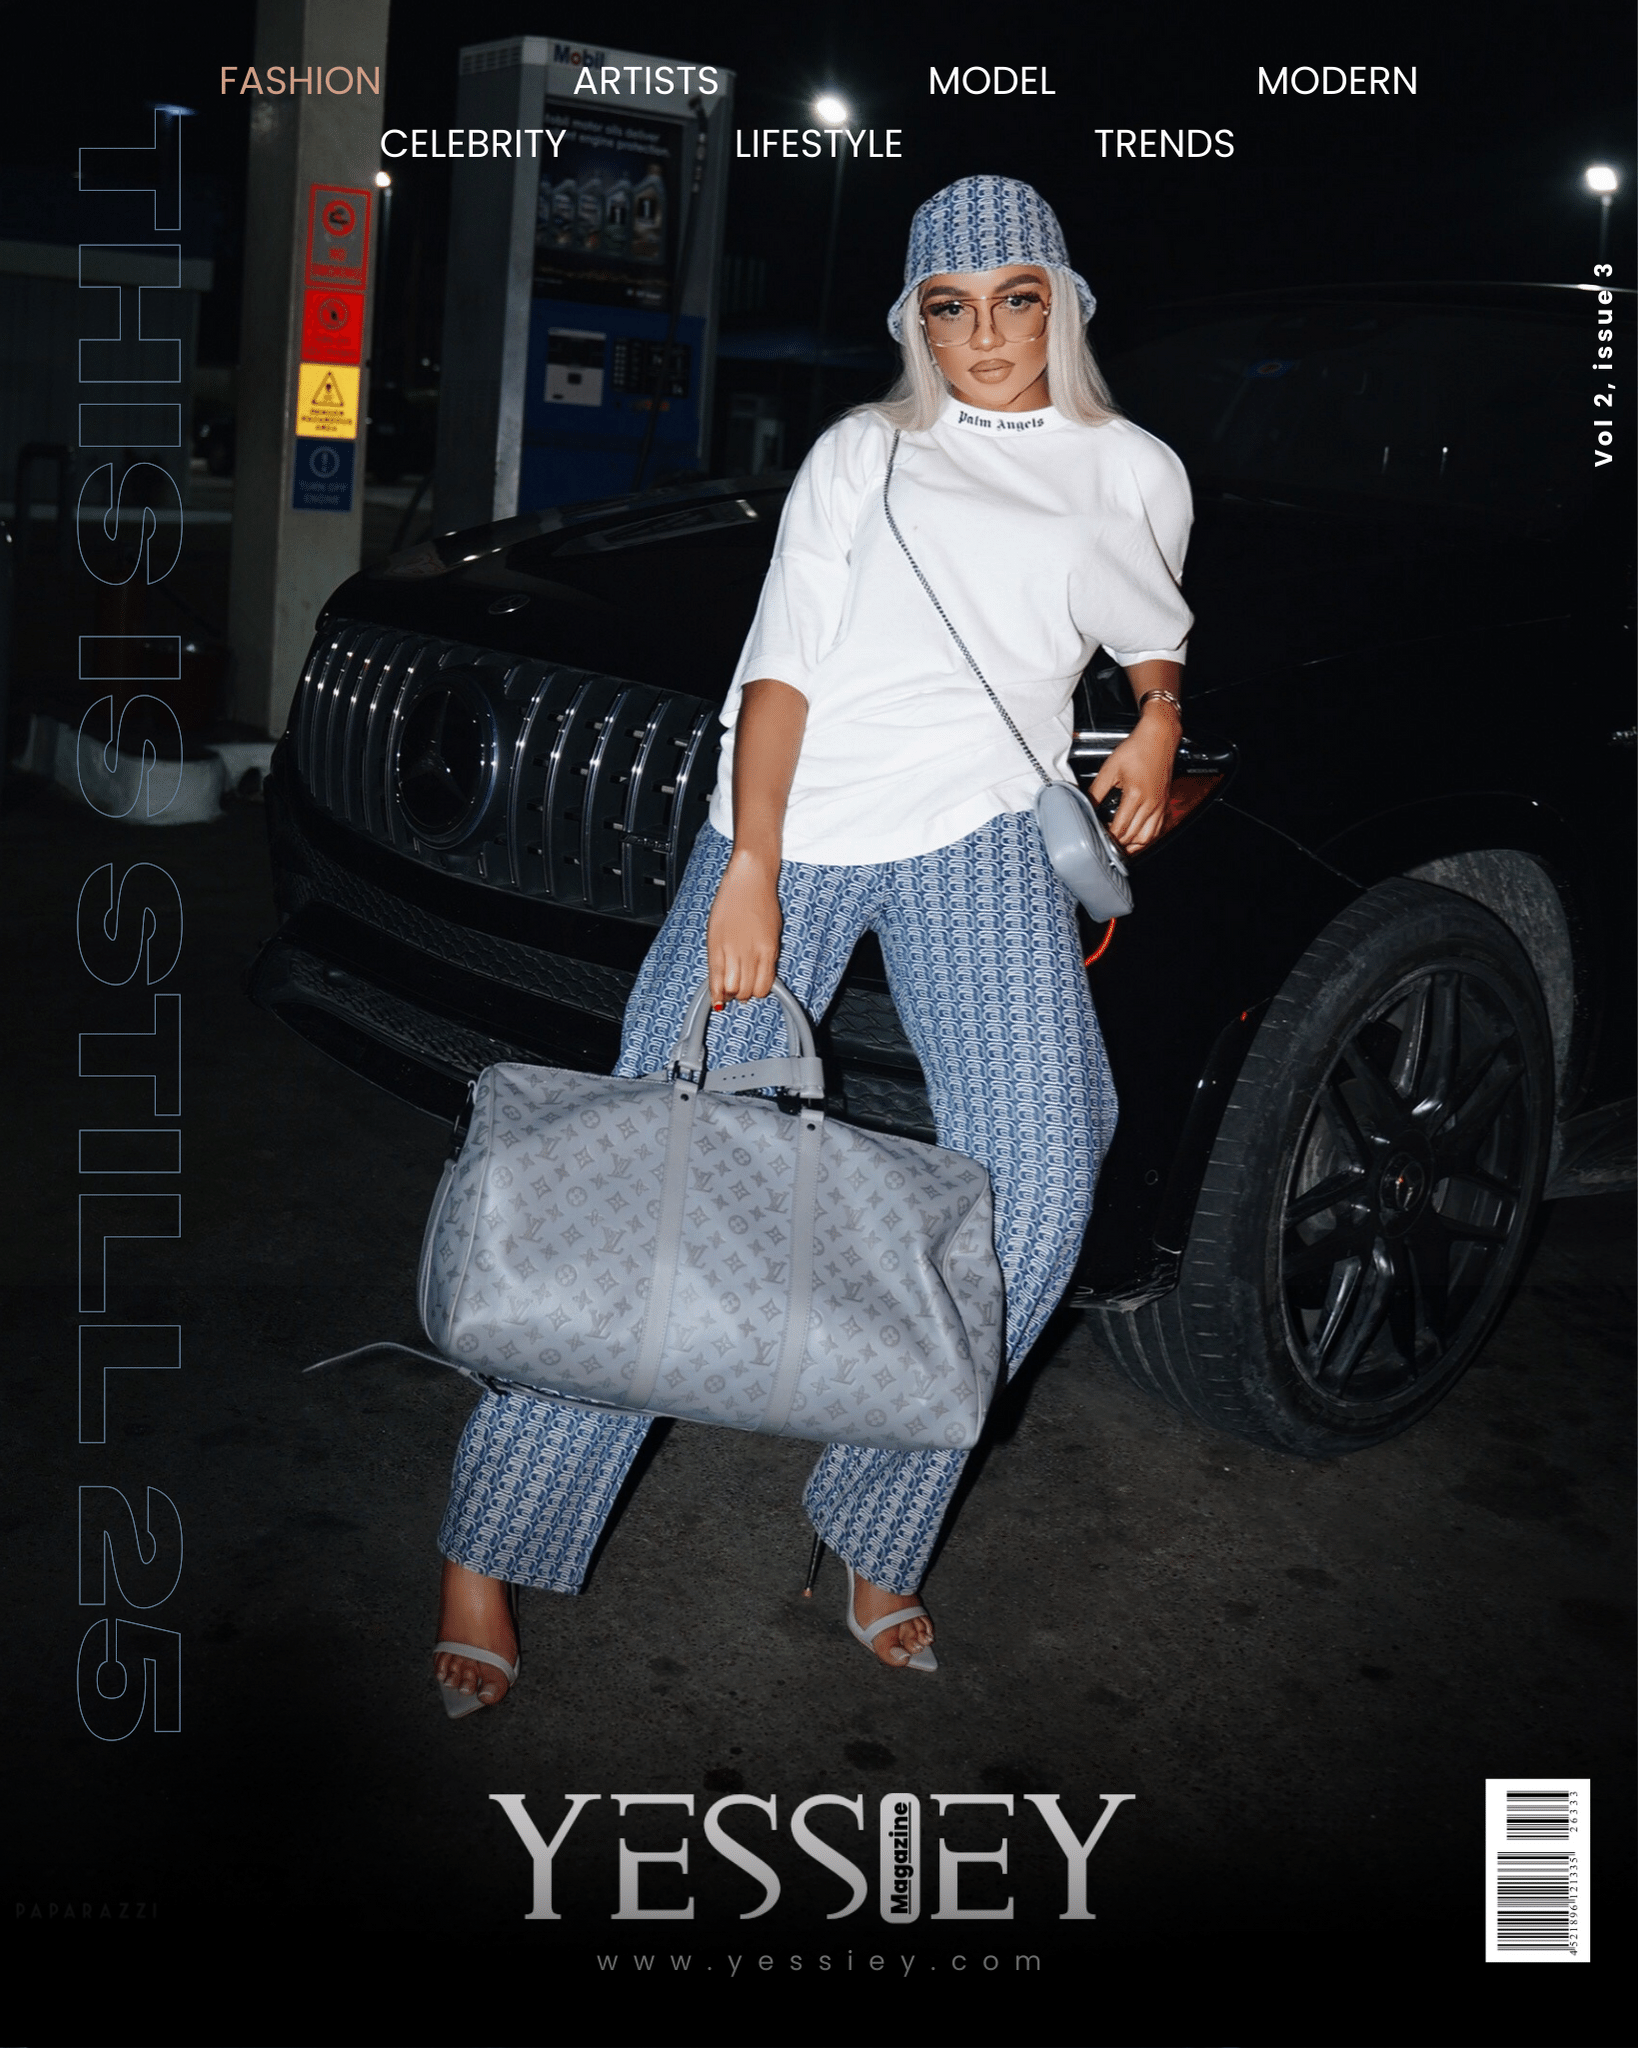 Aniitablonde Covers Yessiey Magazine Talks About Her Music and Fashion